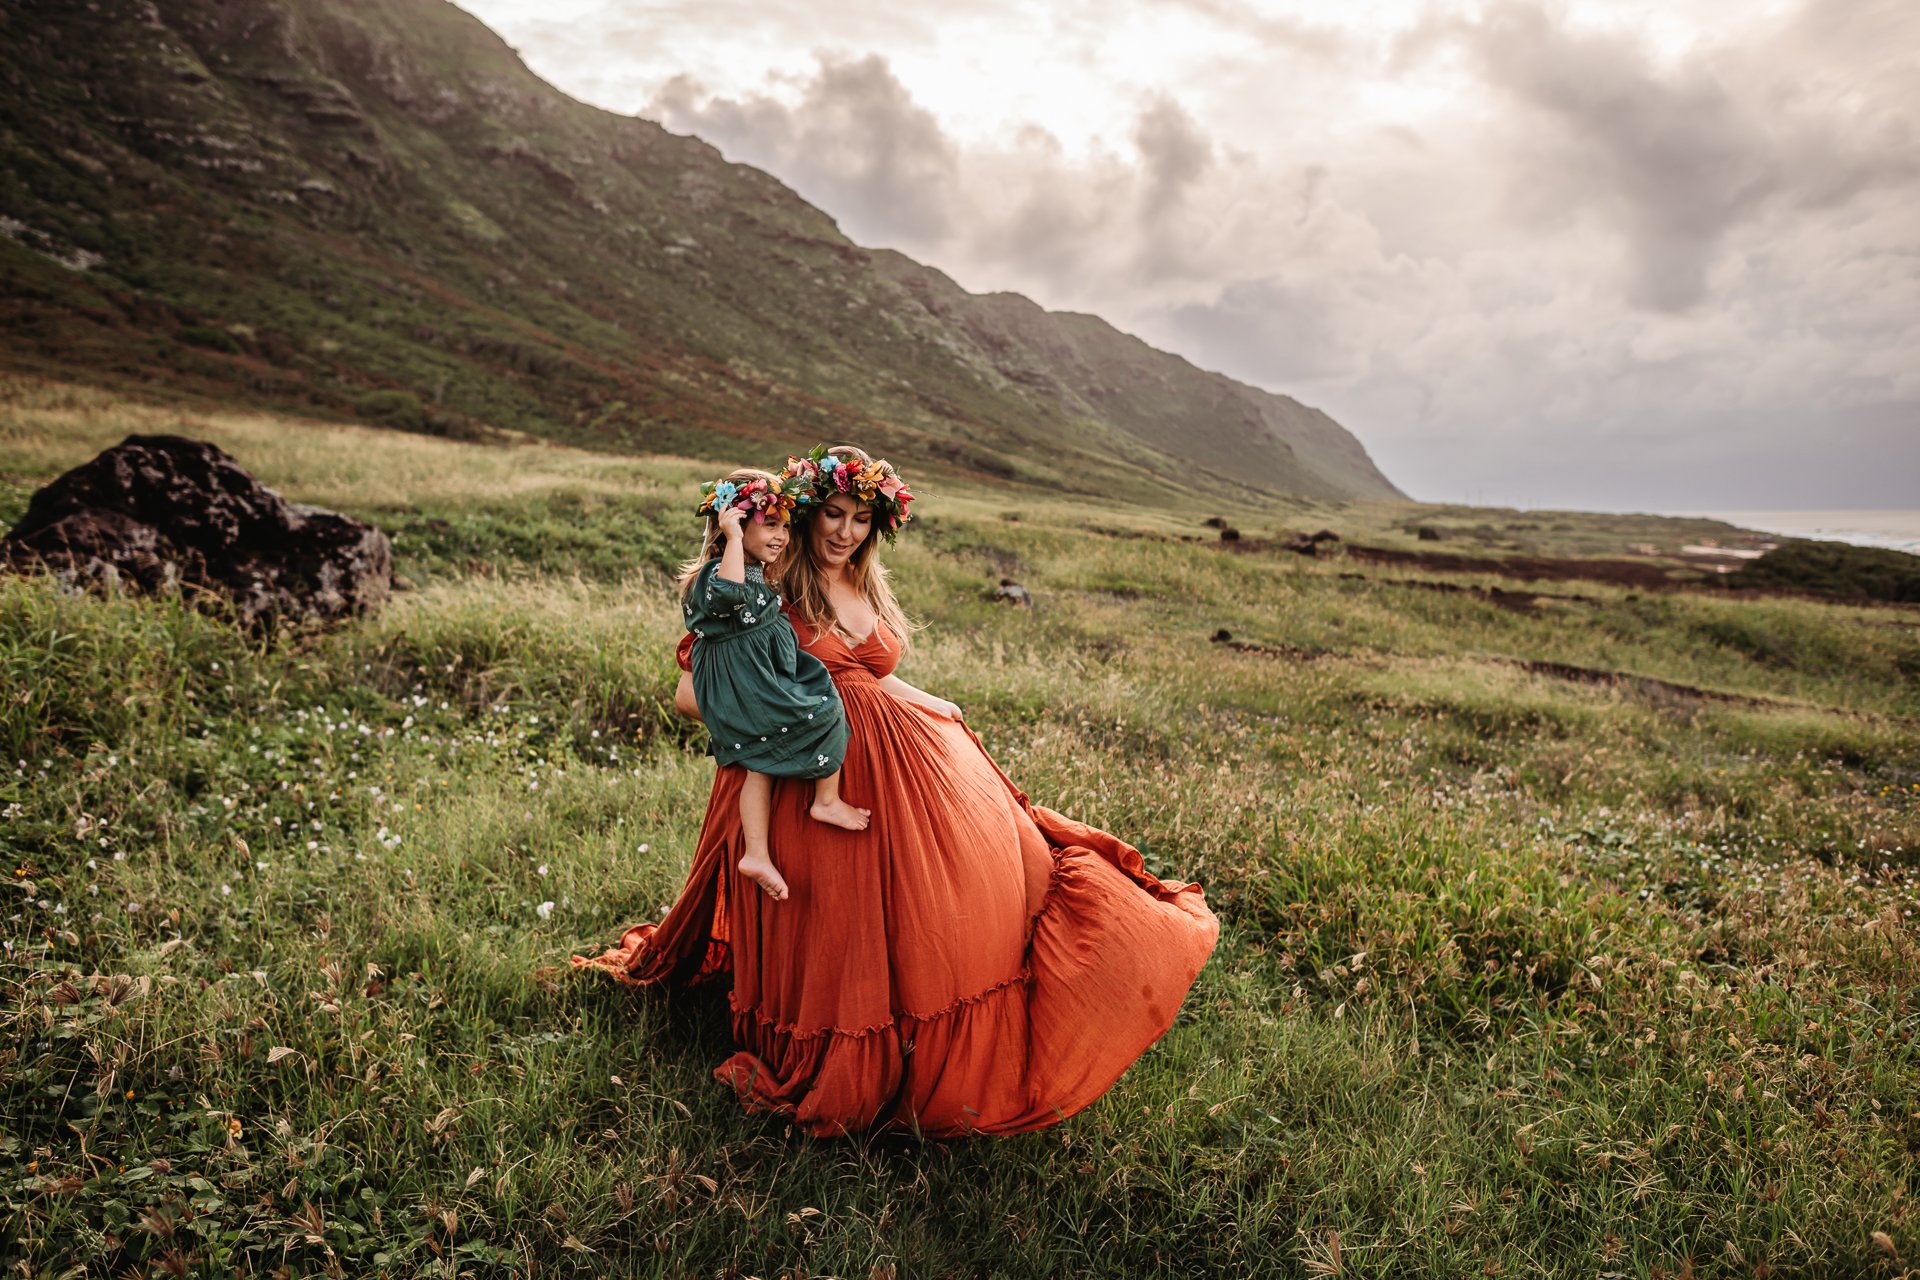 Kaena-Point-North-Shore-Oahu-Hawaii-Maternity-Session-Flower-Crown-Gown-Sarah-Elizabeth-Photos-and-film-maternity--10.jpg